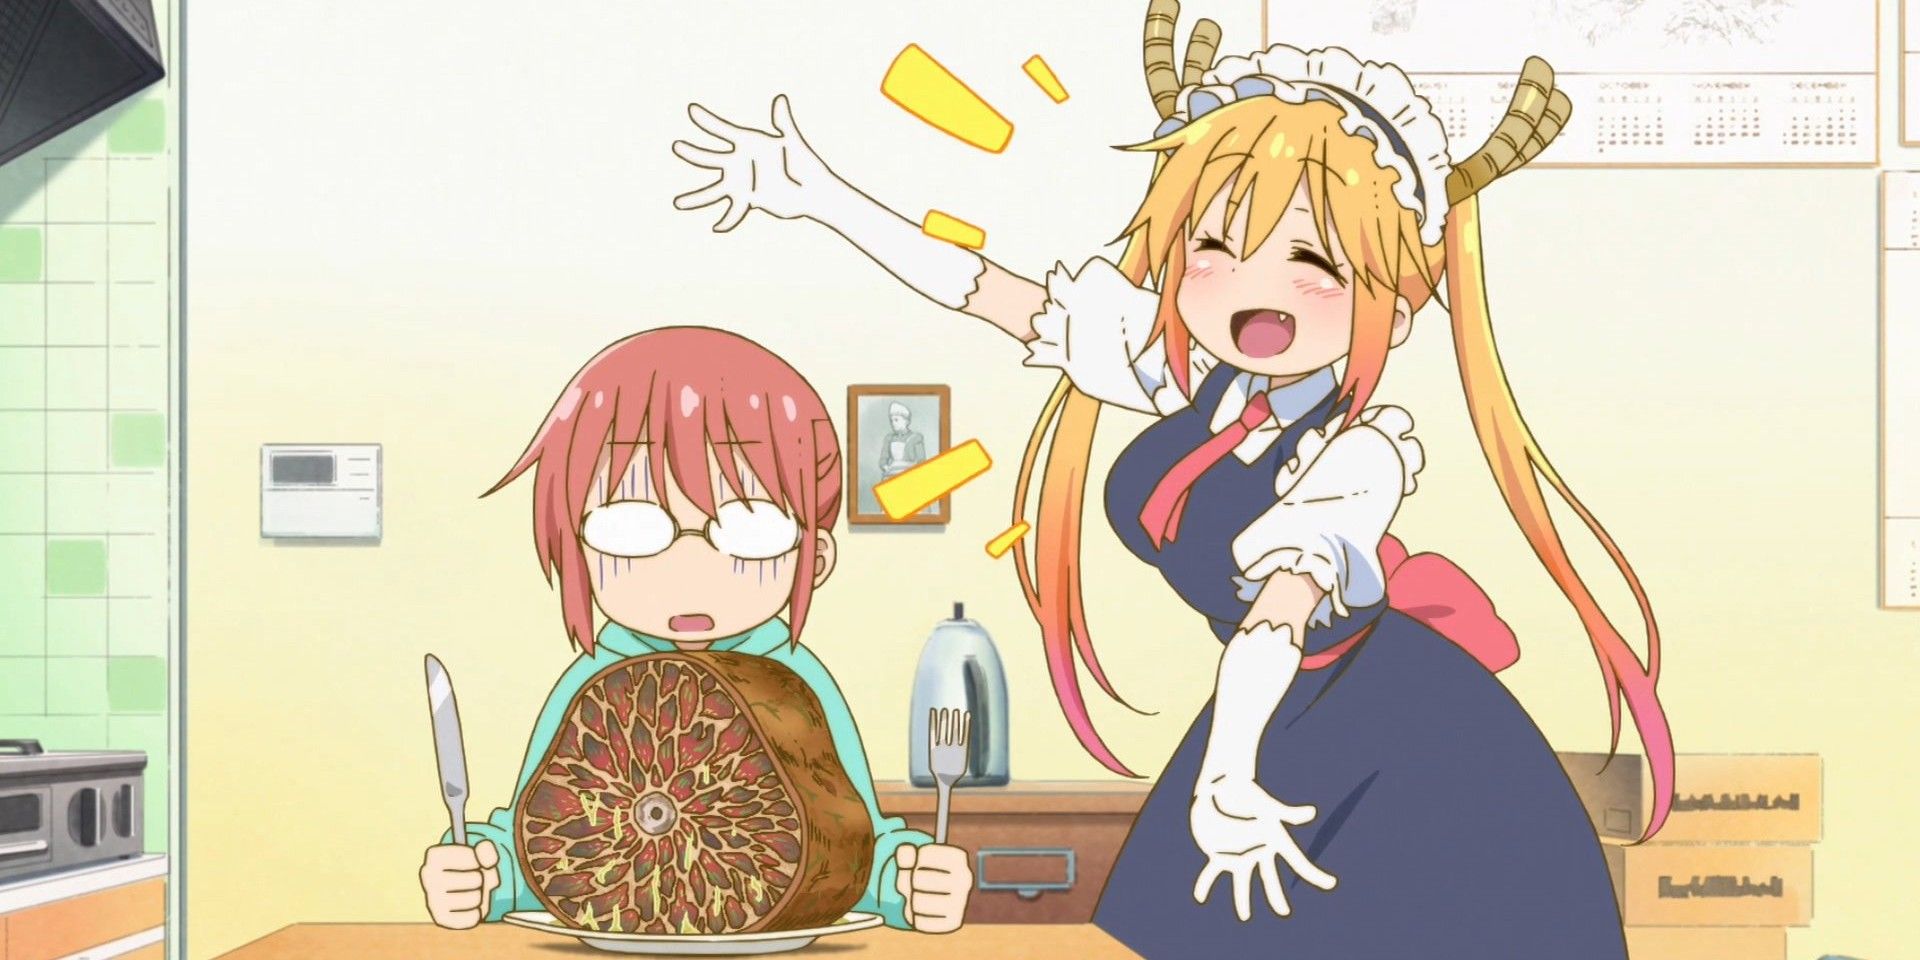 Tohru attempts to feed Kobayashi her tail